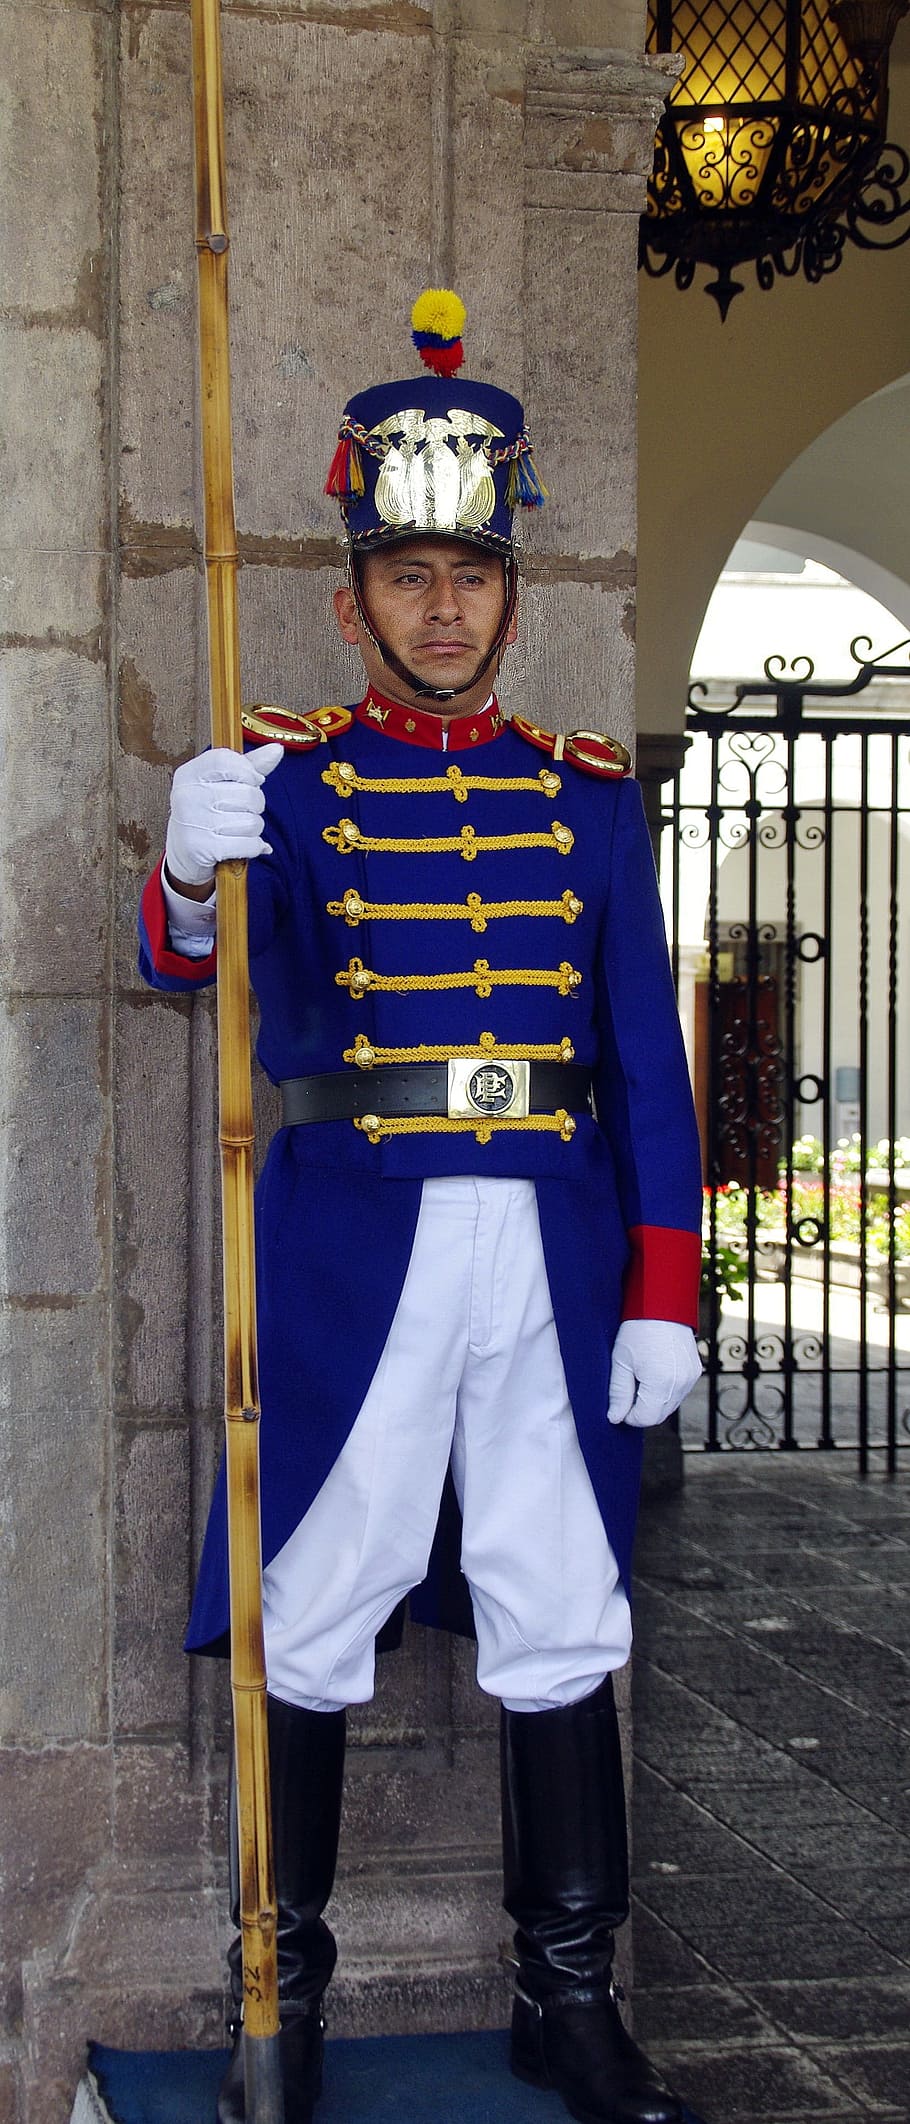 Quito, Guard, Presidential, Uniform, military, guardian, man in uniform, palace, honor Guard, people